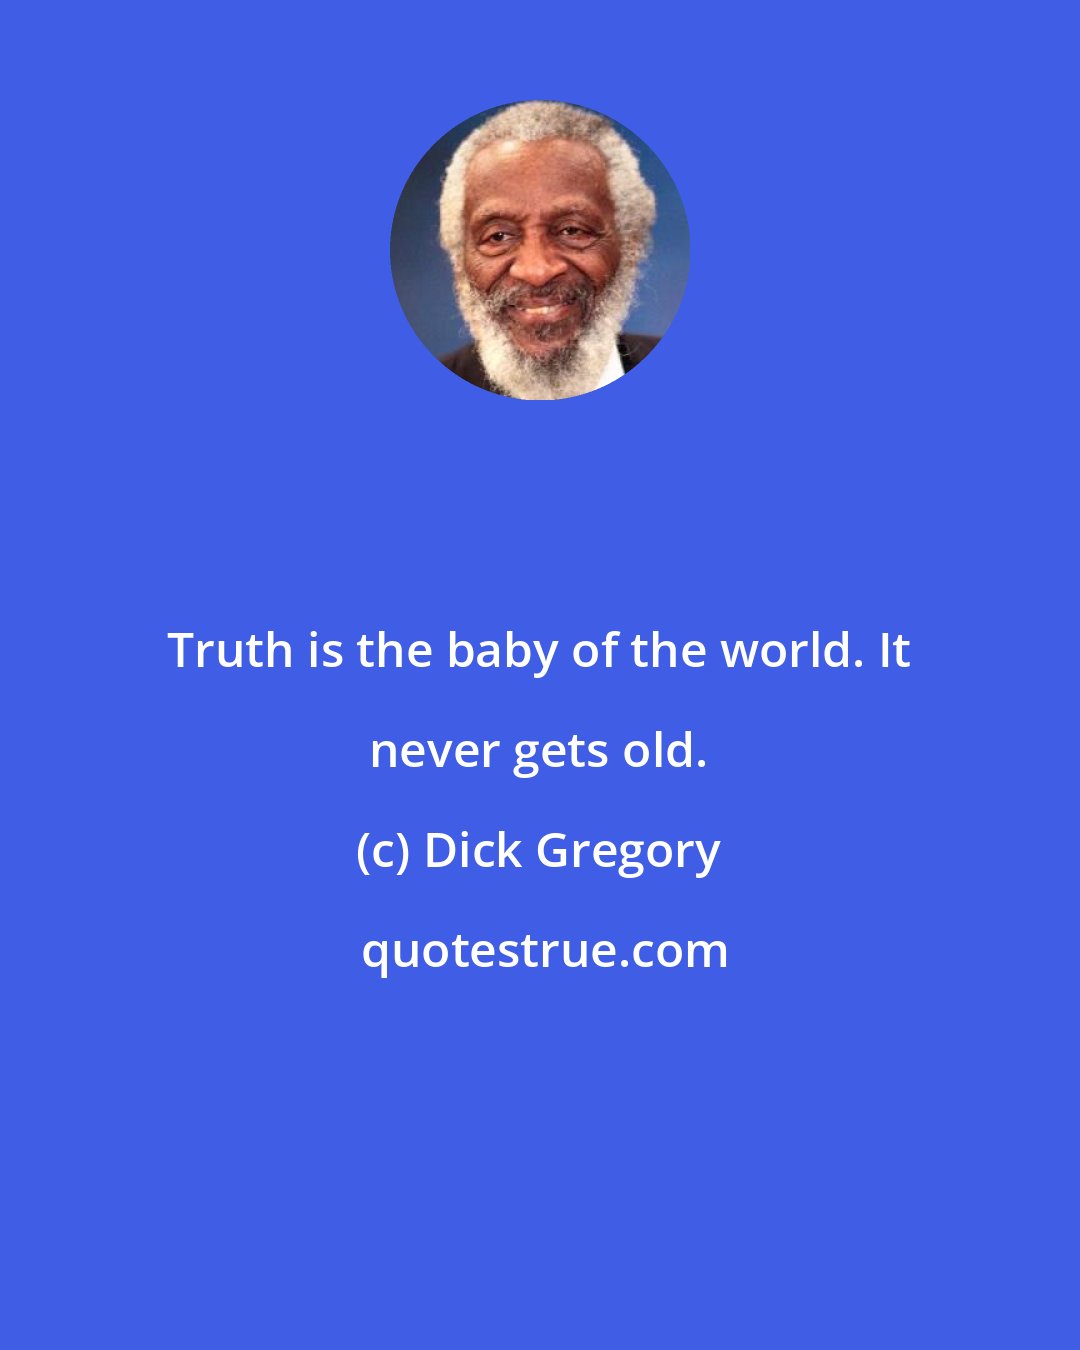 Dick Gregory: Truth is the baby of the world. It never gets old.